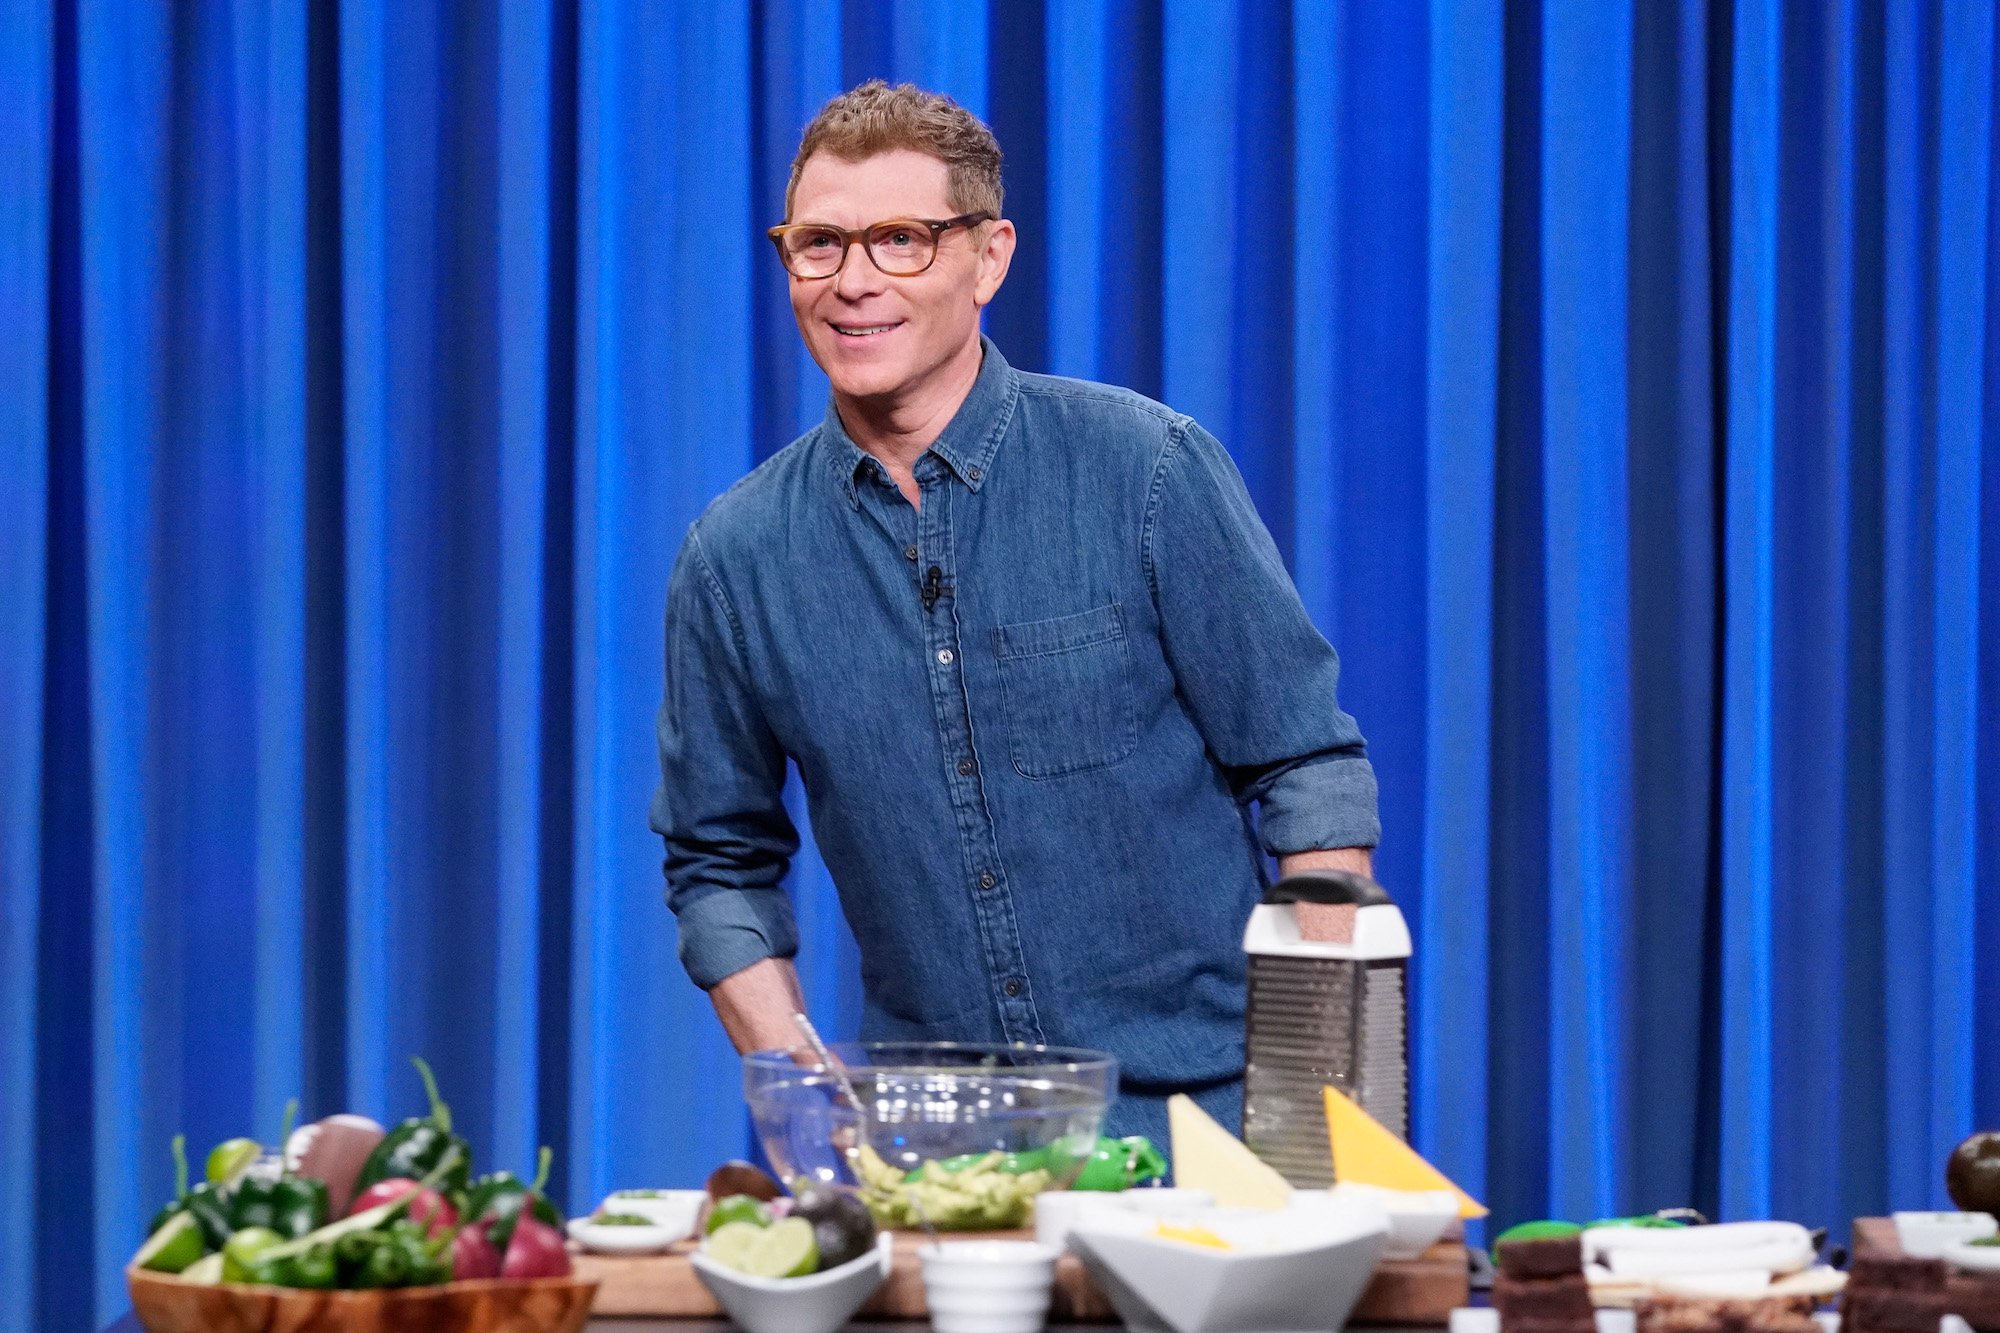 Chef Bobby Flay cooks in front of an audience